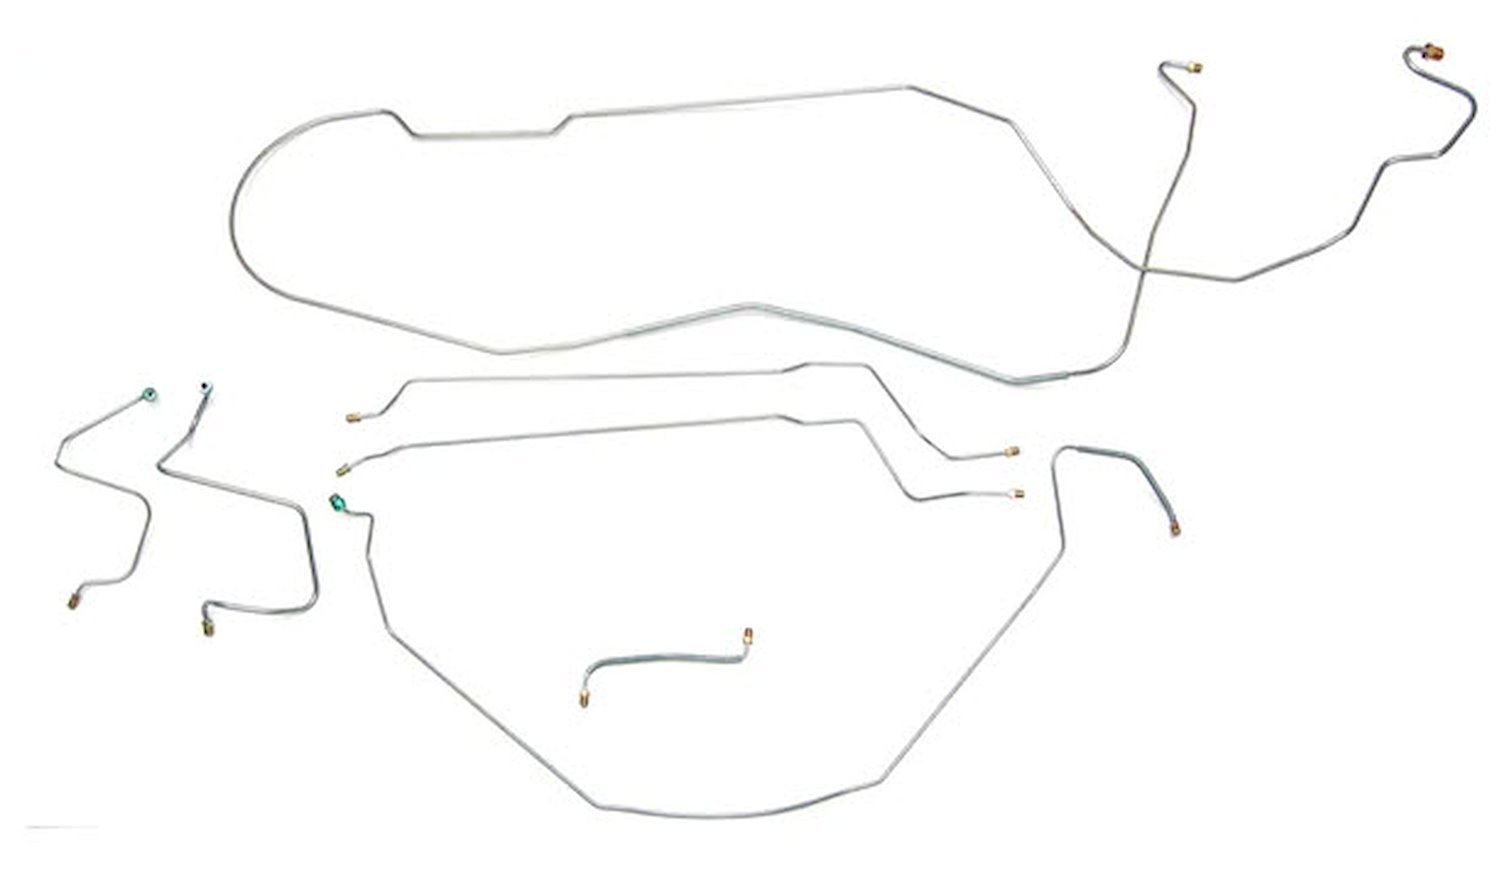 Complete Brake Line Set for 1967 Chevy Chevelle,